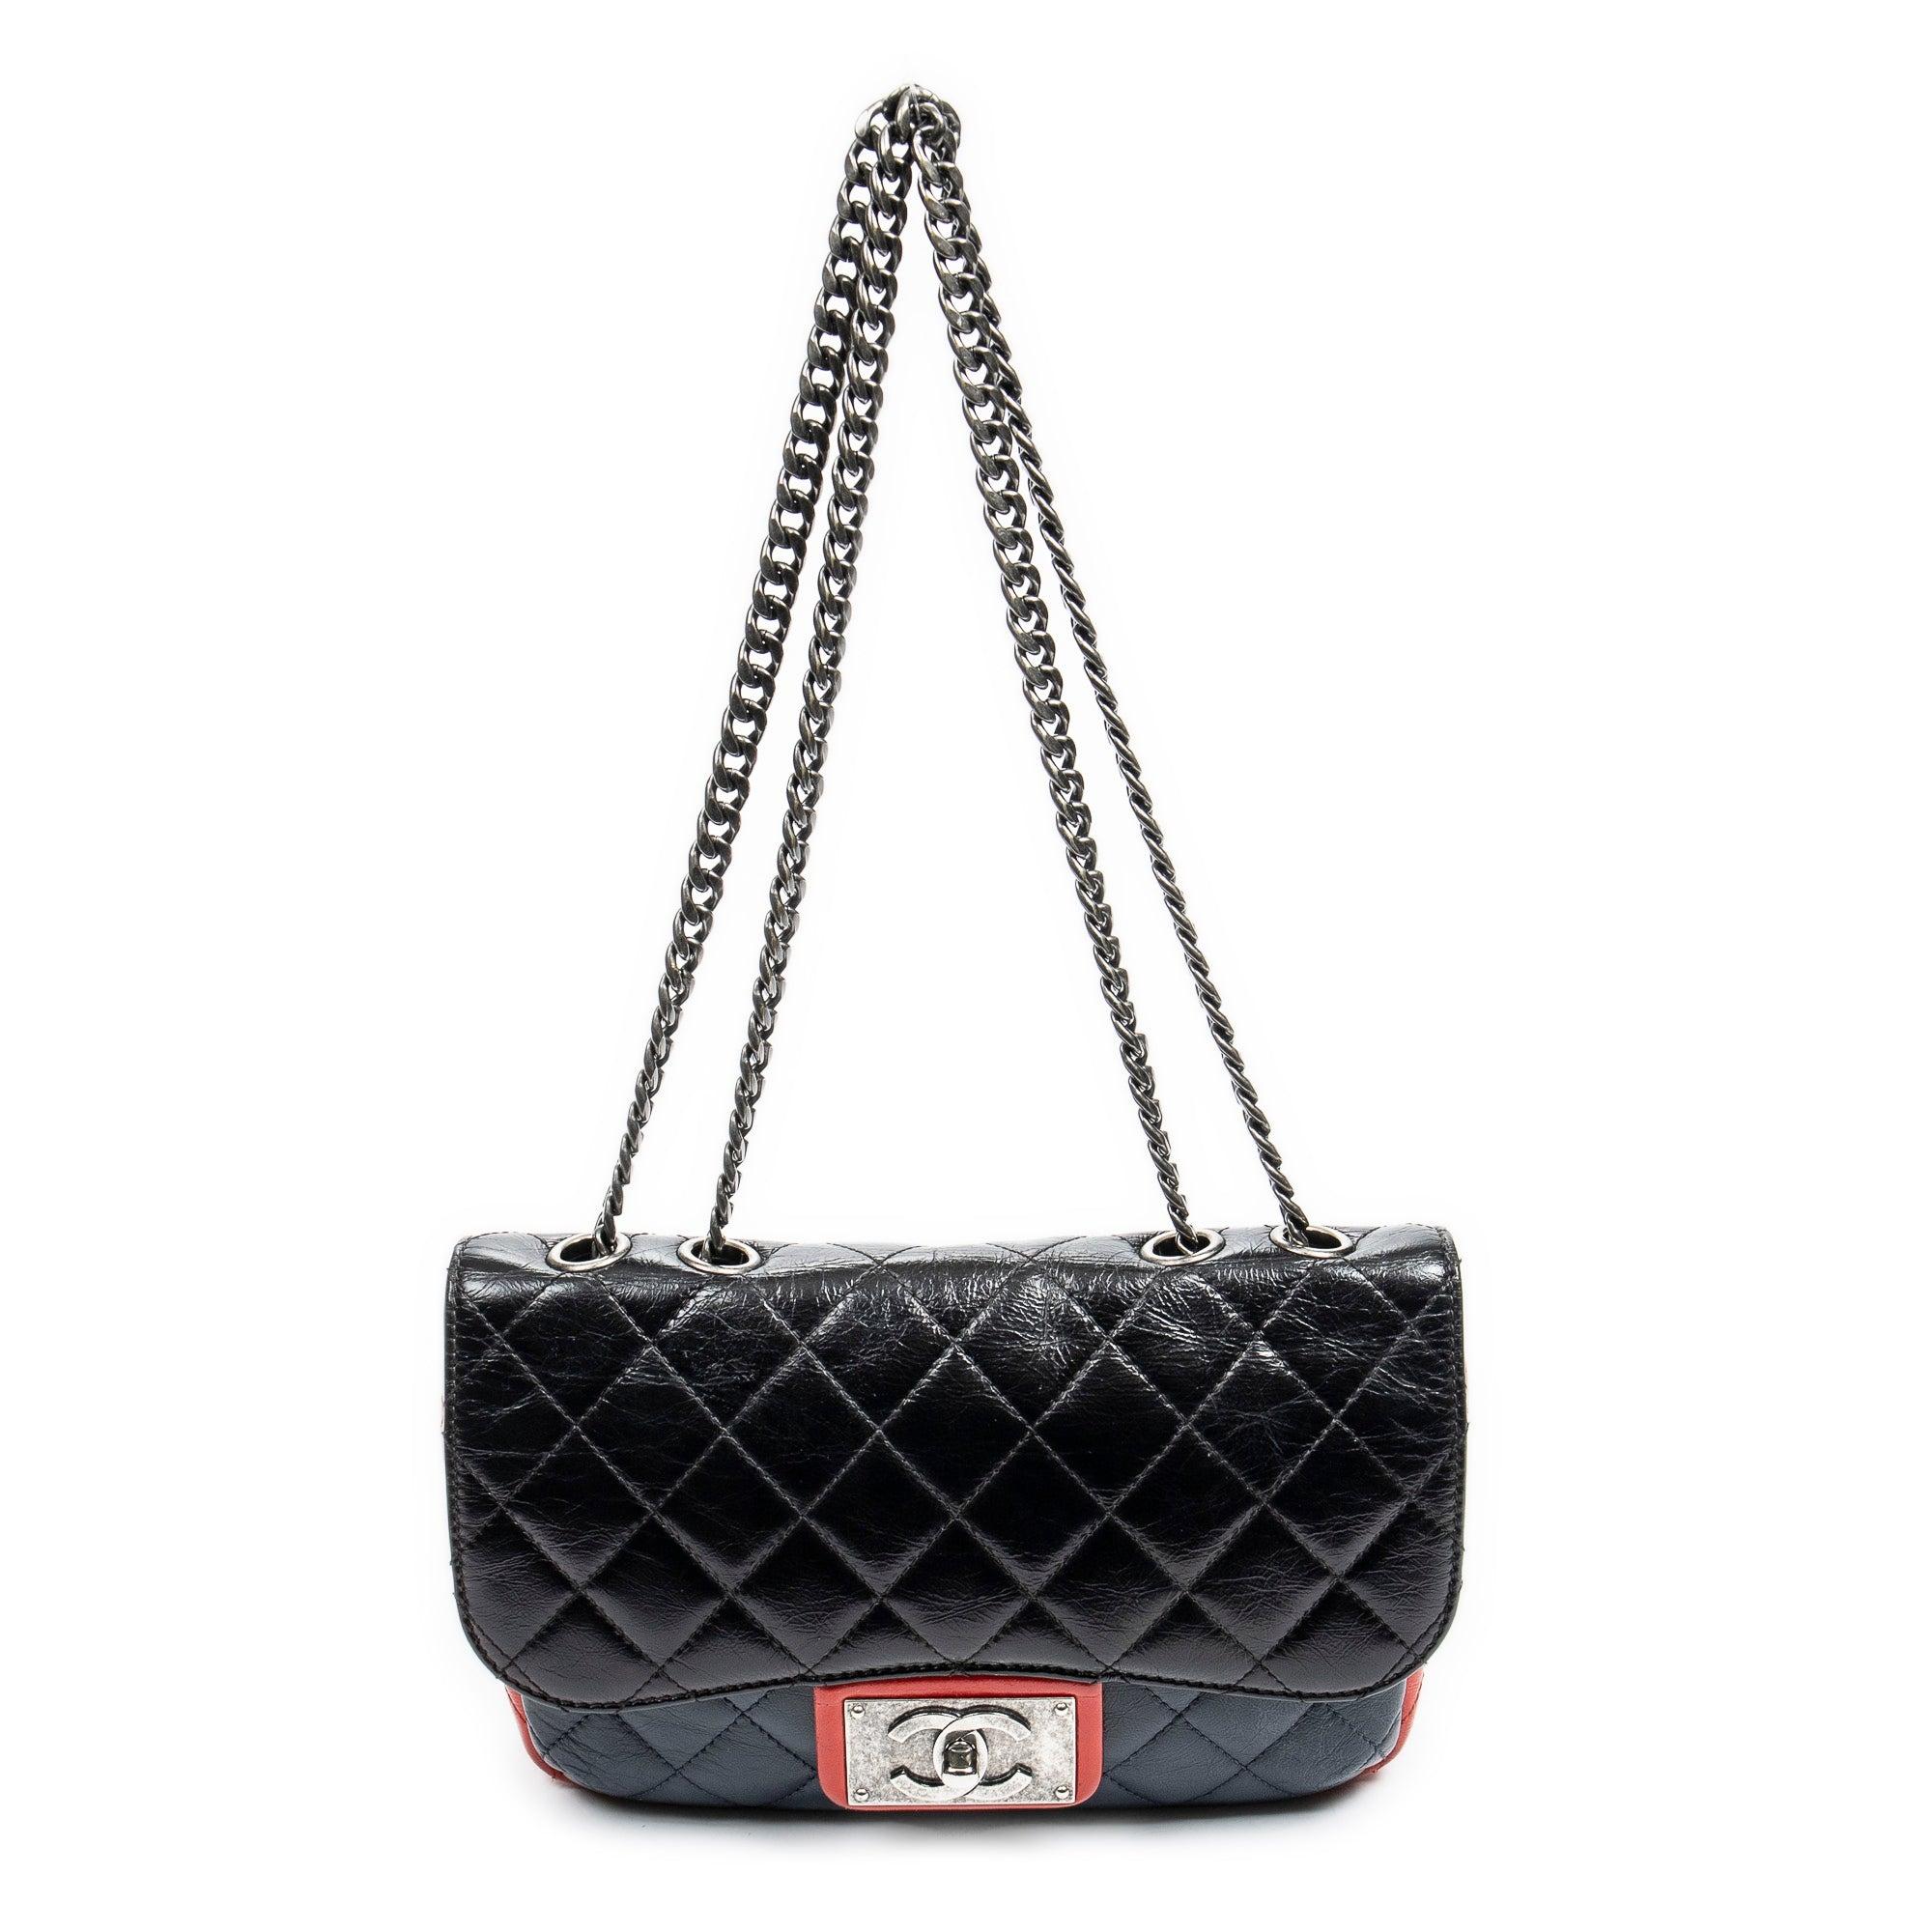 Chanel Cc Tricolor Plate Flap in Black